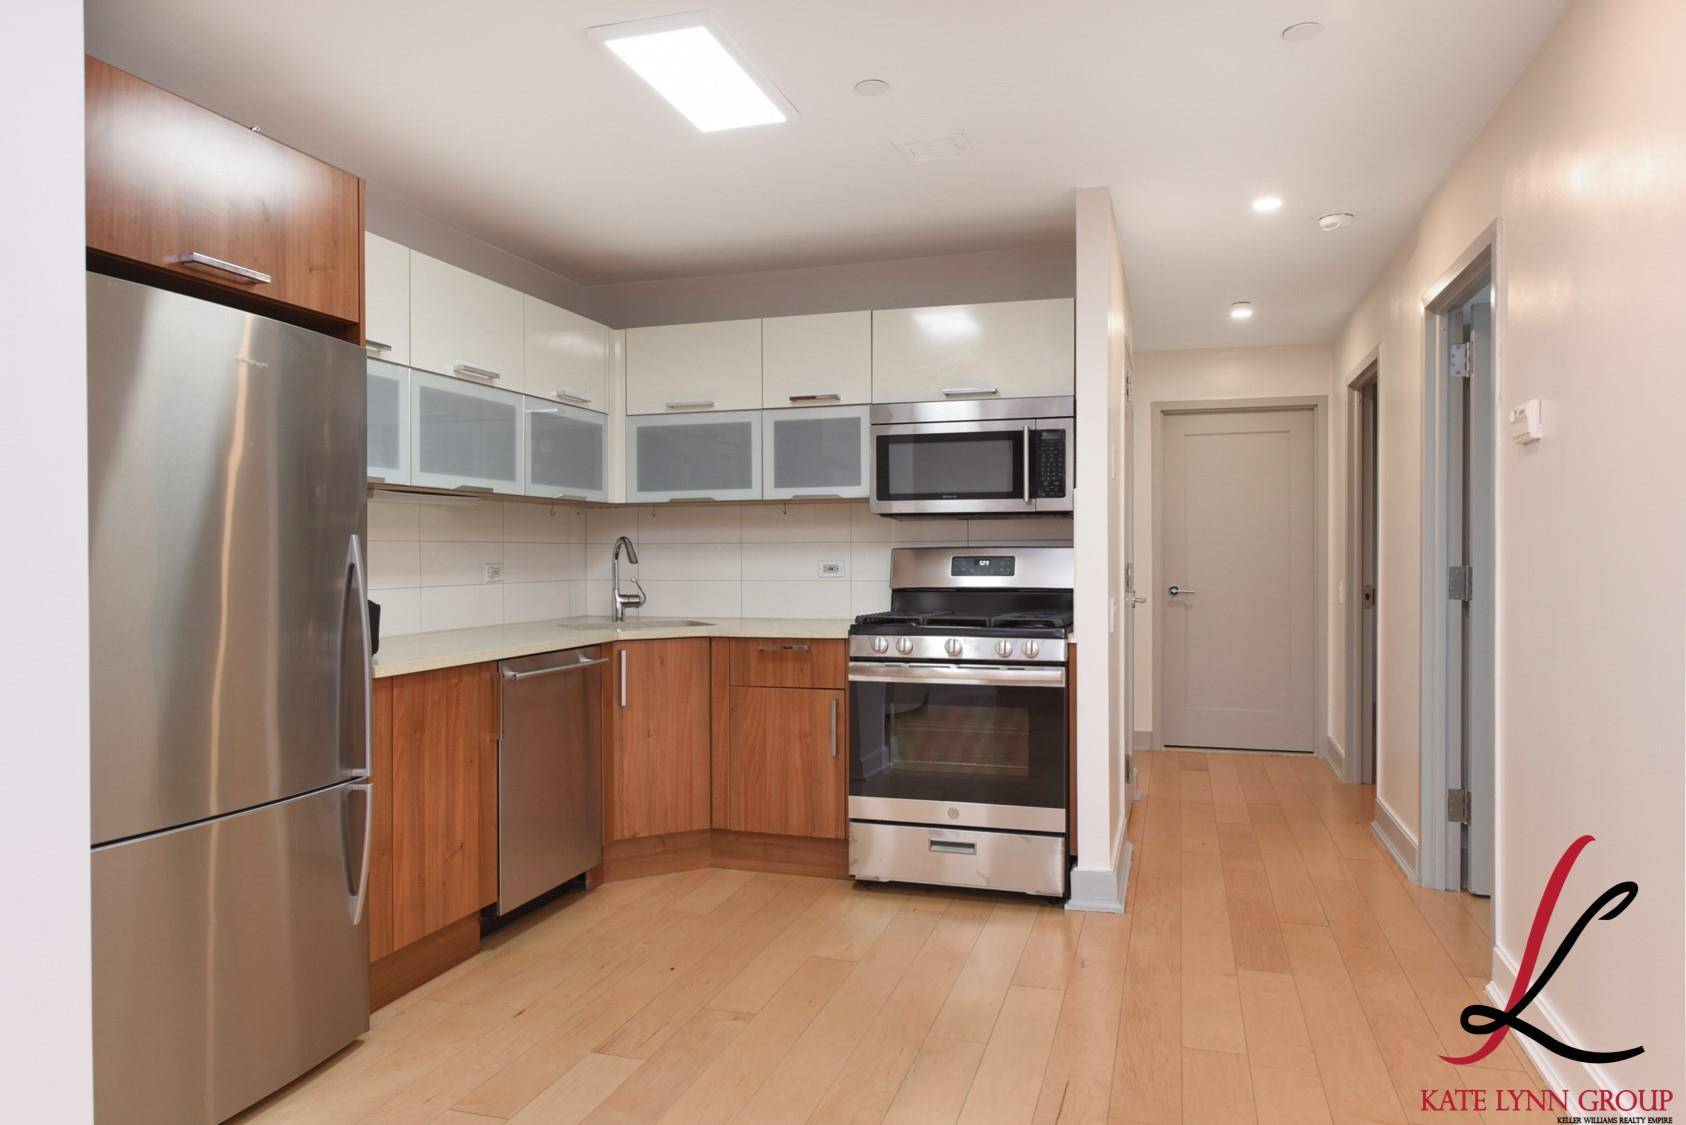 Beautiful Sunny Corner unit in the most sought after Full Service Condominium on 4th Ave Park Slope.